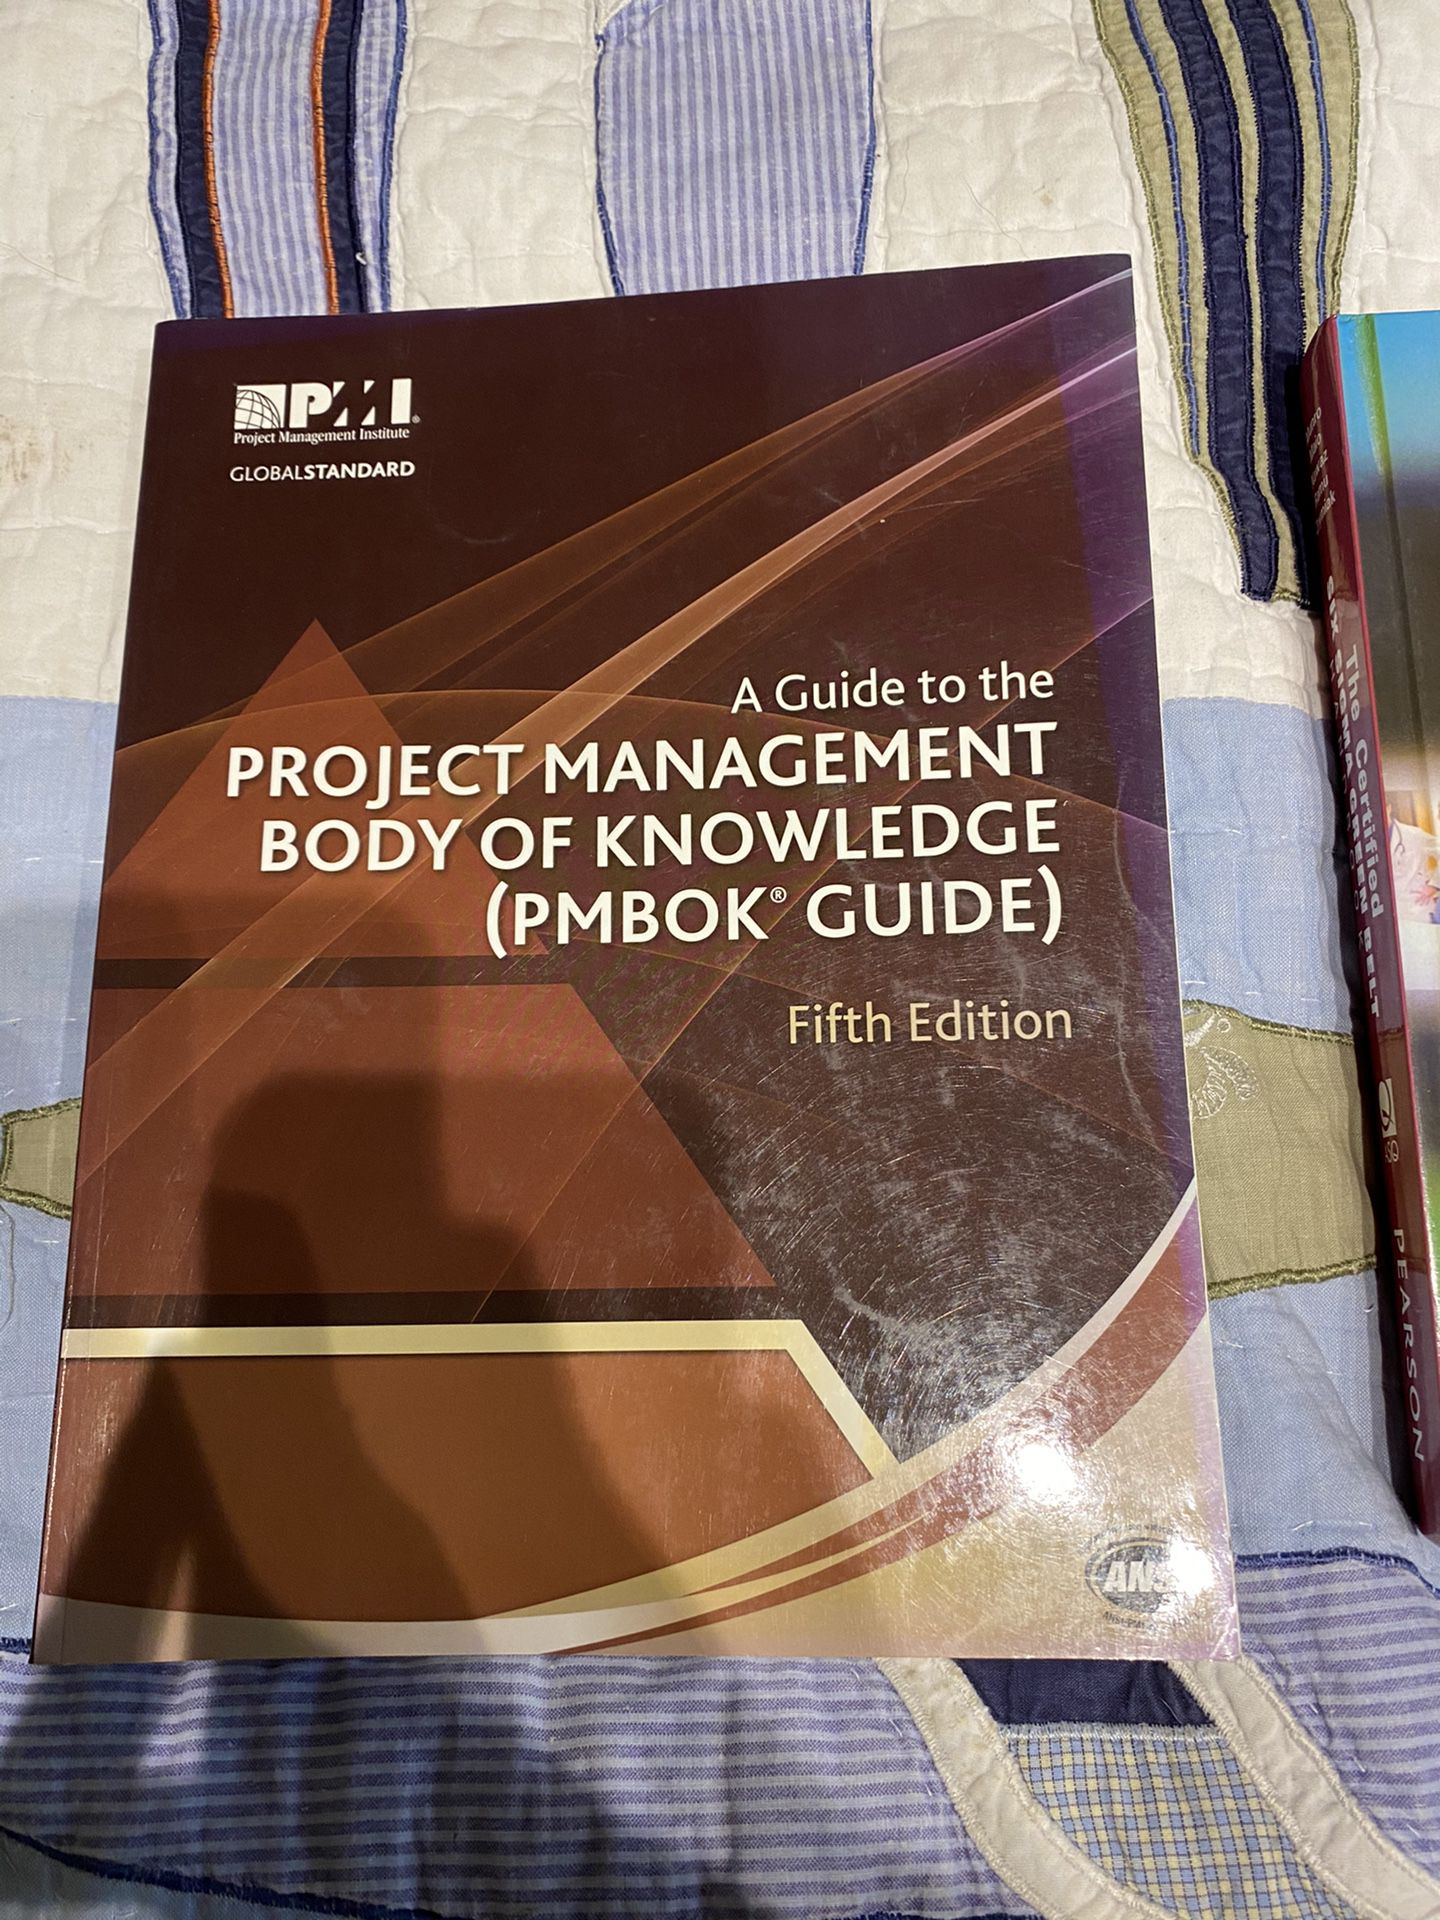 A Guide to the Project Management Body Of Knowledge (PMBOK Guide) fifth edition